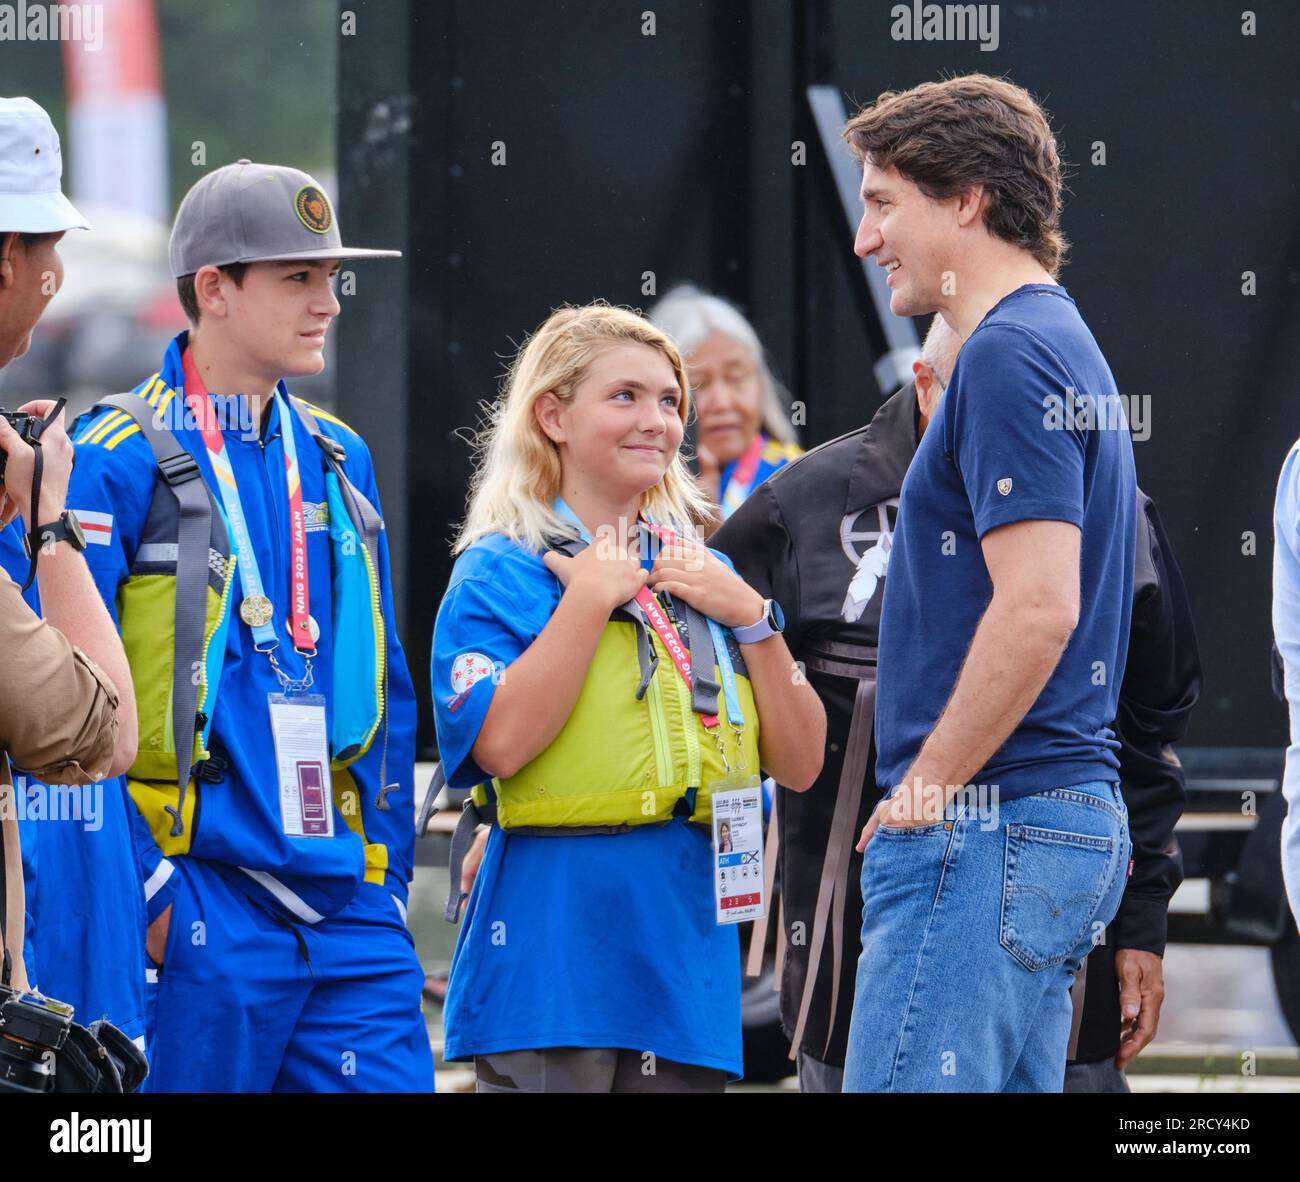 Dartmouth, Nova Scotia, Canada. July 17th, 2023. Canadian Prime Minister Justin Trudeau is greeted by Athletes of the Nova Scotia team as he rides an Indigenous Canoe at the opening of the Canoe competition at the North American Indigenous Games. Over 5000 athletes from 756 Indigenous Nations across Turtle Island will be competing until July 23rd with competitions in 16 sports within 21 venues across the area. Credit: meanderingemu/Alamy Live News Stock Photo